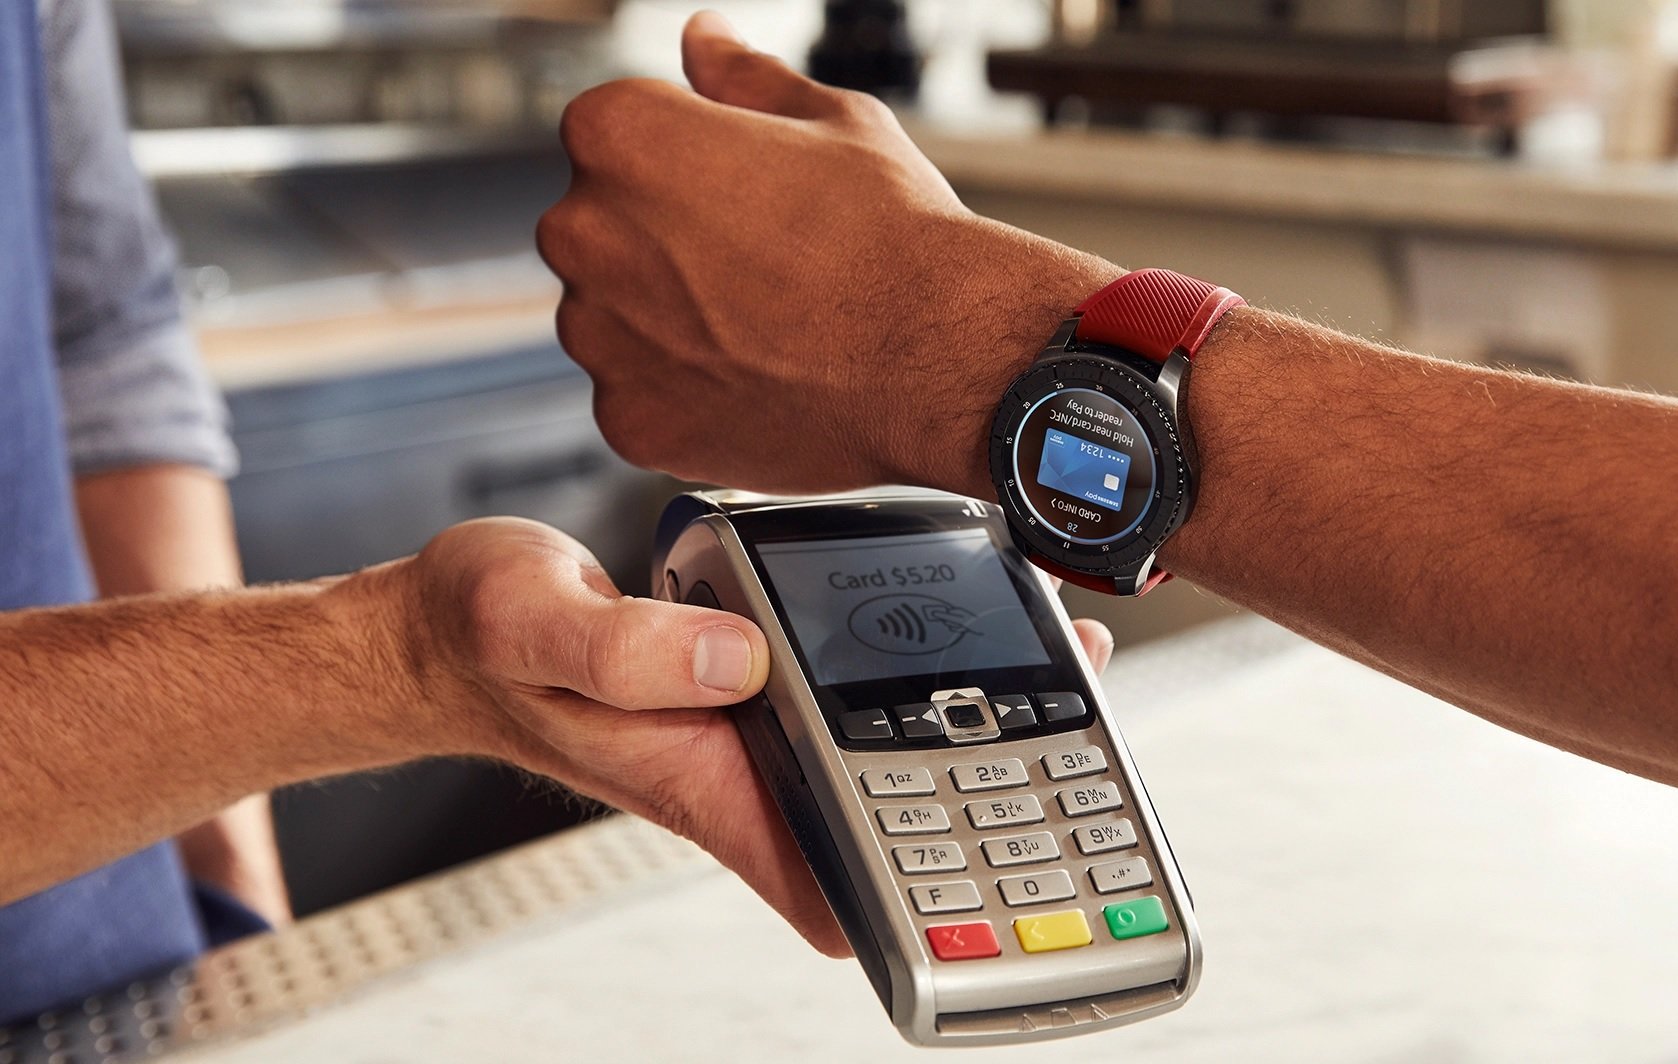 samsung pay for galaxy watch